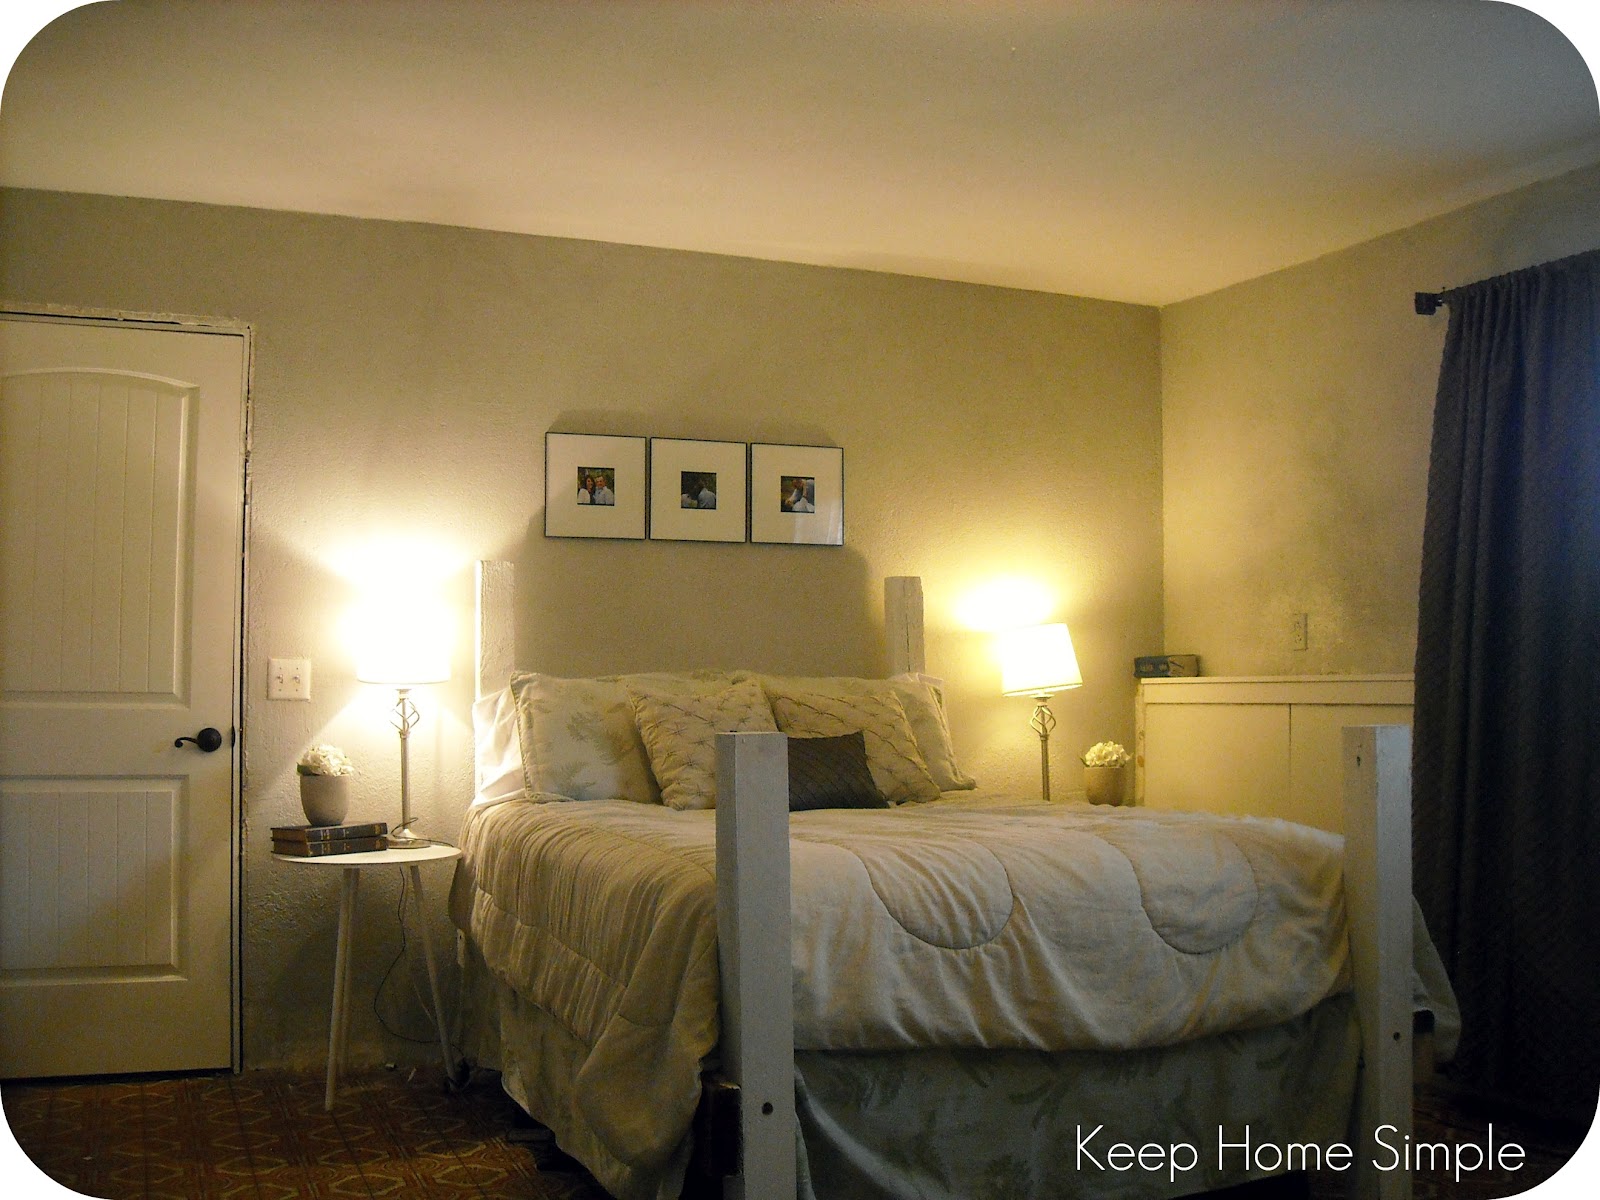 Keep Home Simple Redecorating  Our Masterbedroom on a 